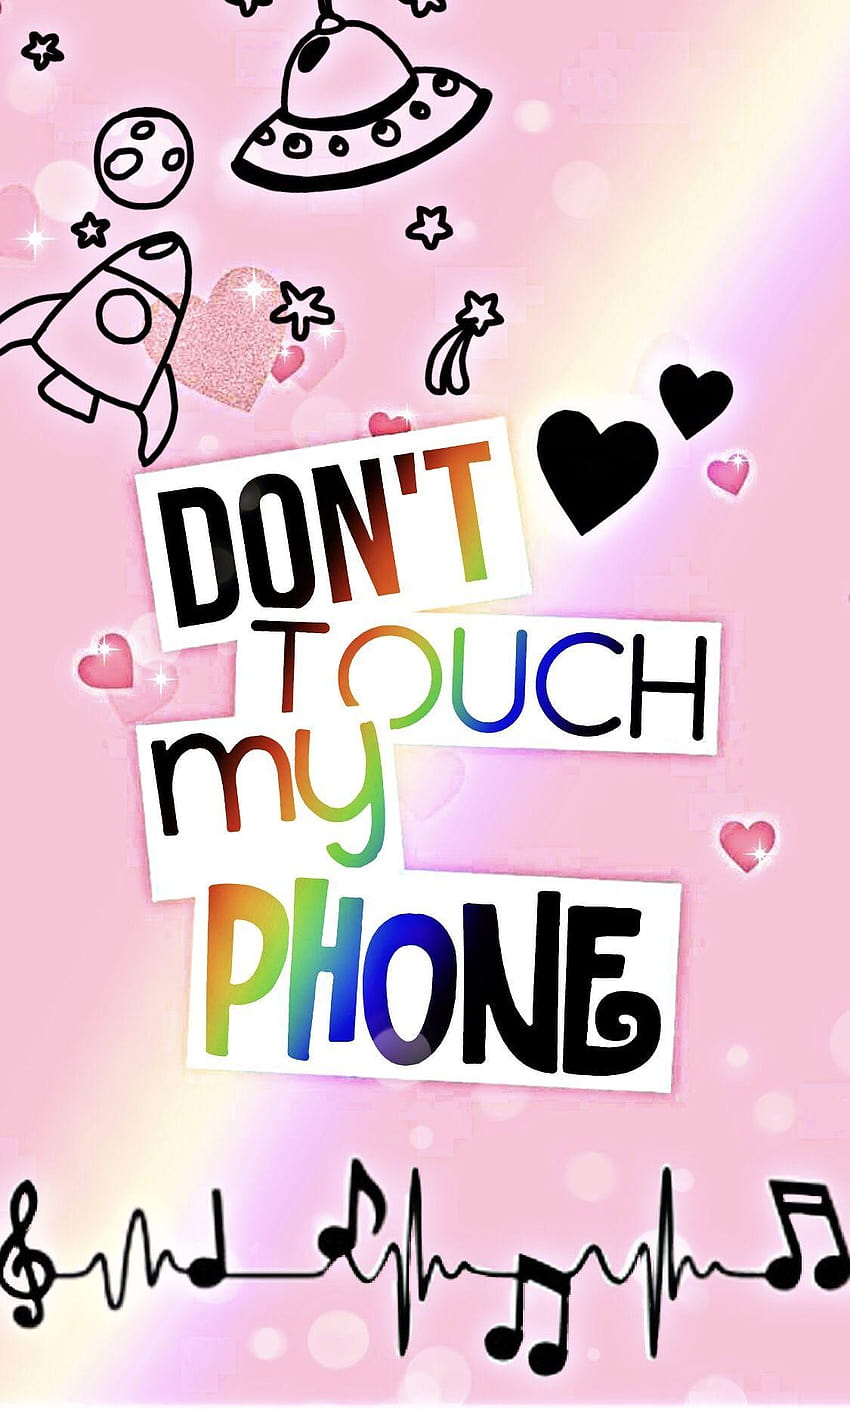 Dont touch my phone wallpaper  Apps on Google Play